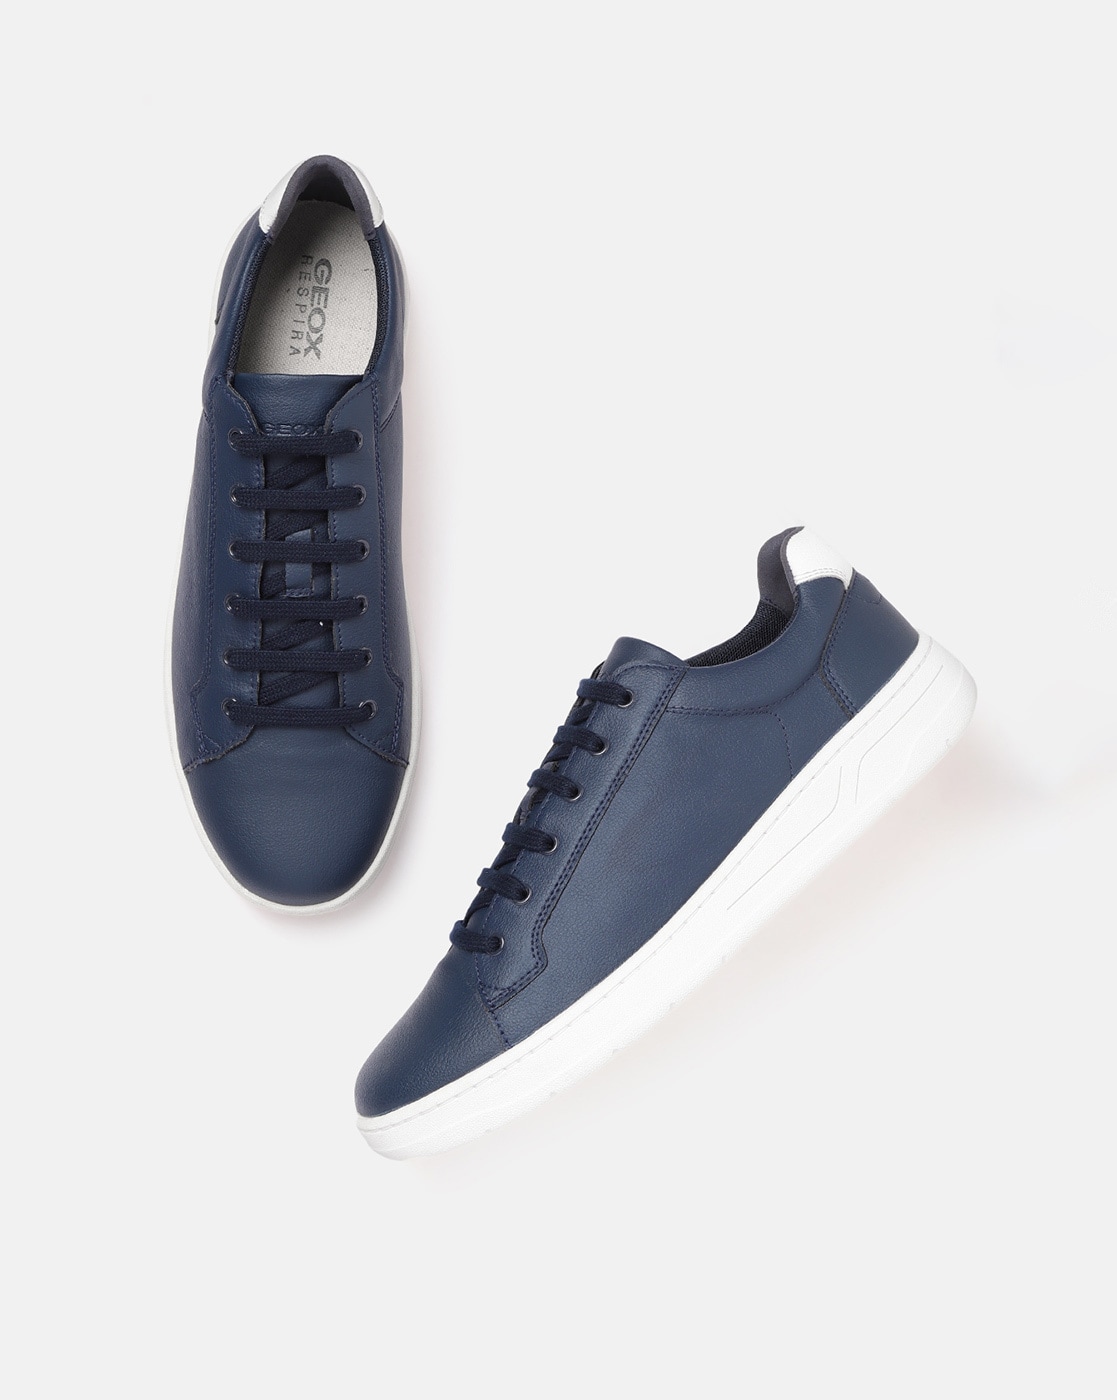 Navy Blue Lace Up Mid Top Sneakers for Men by GentWith.com